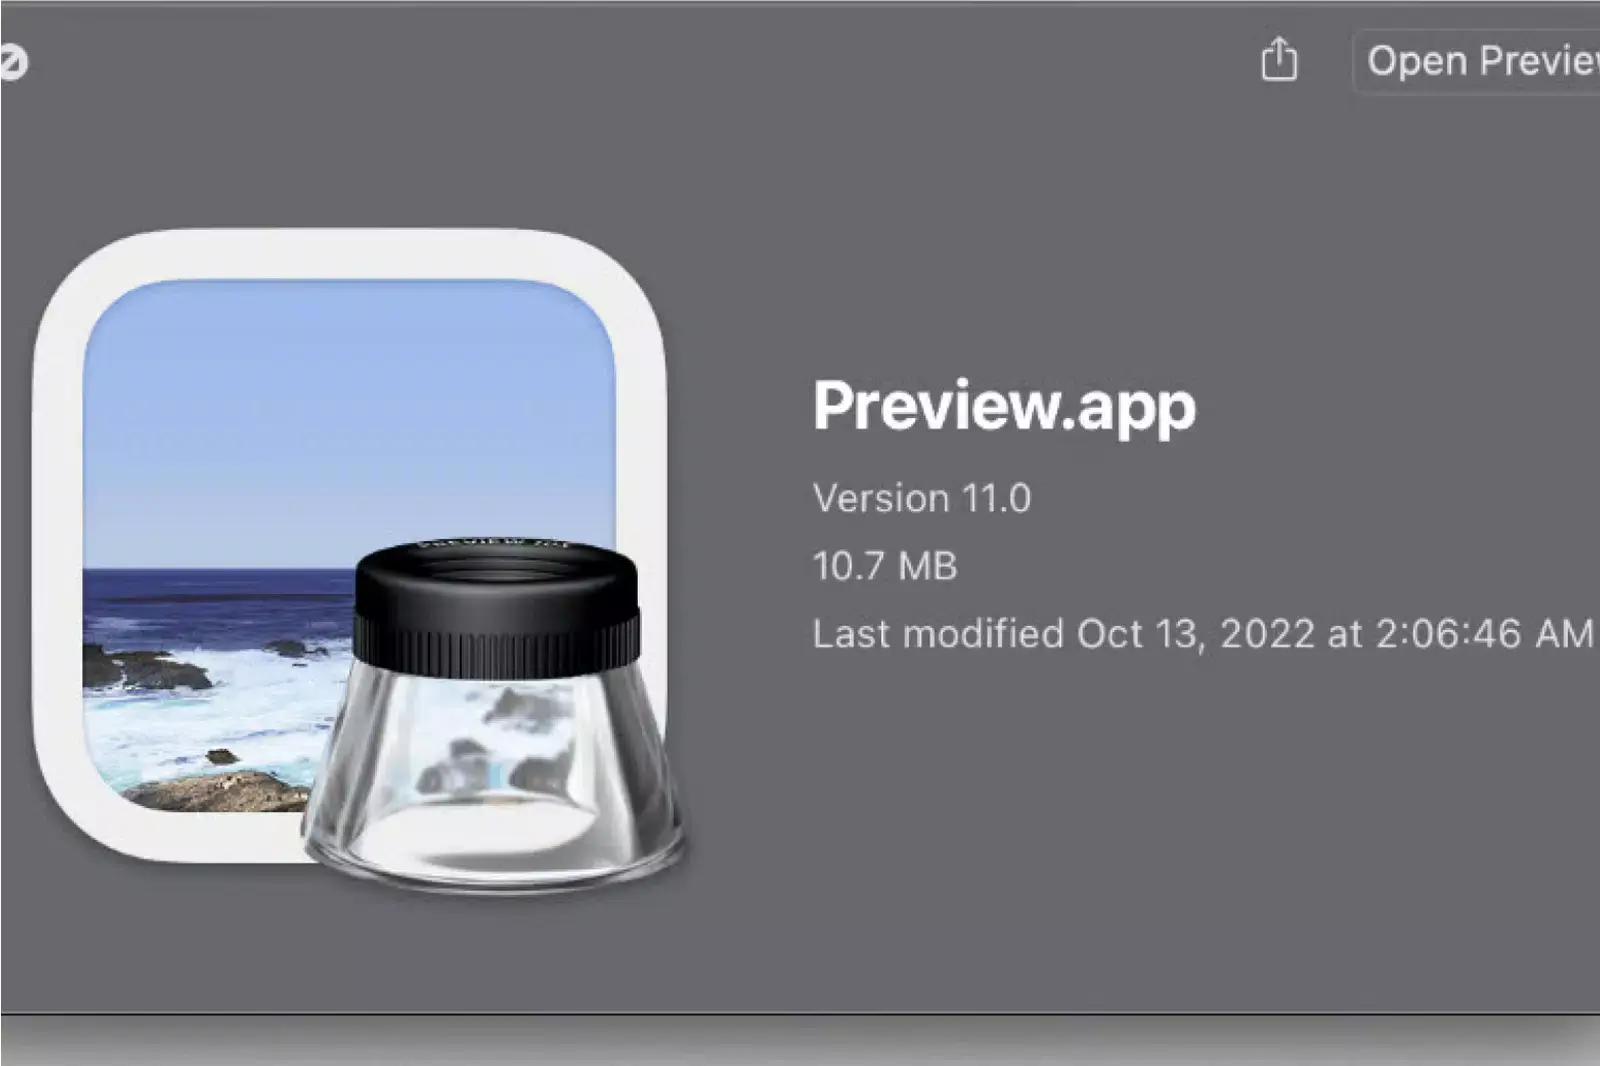 Preview for Mac OS X